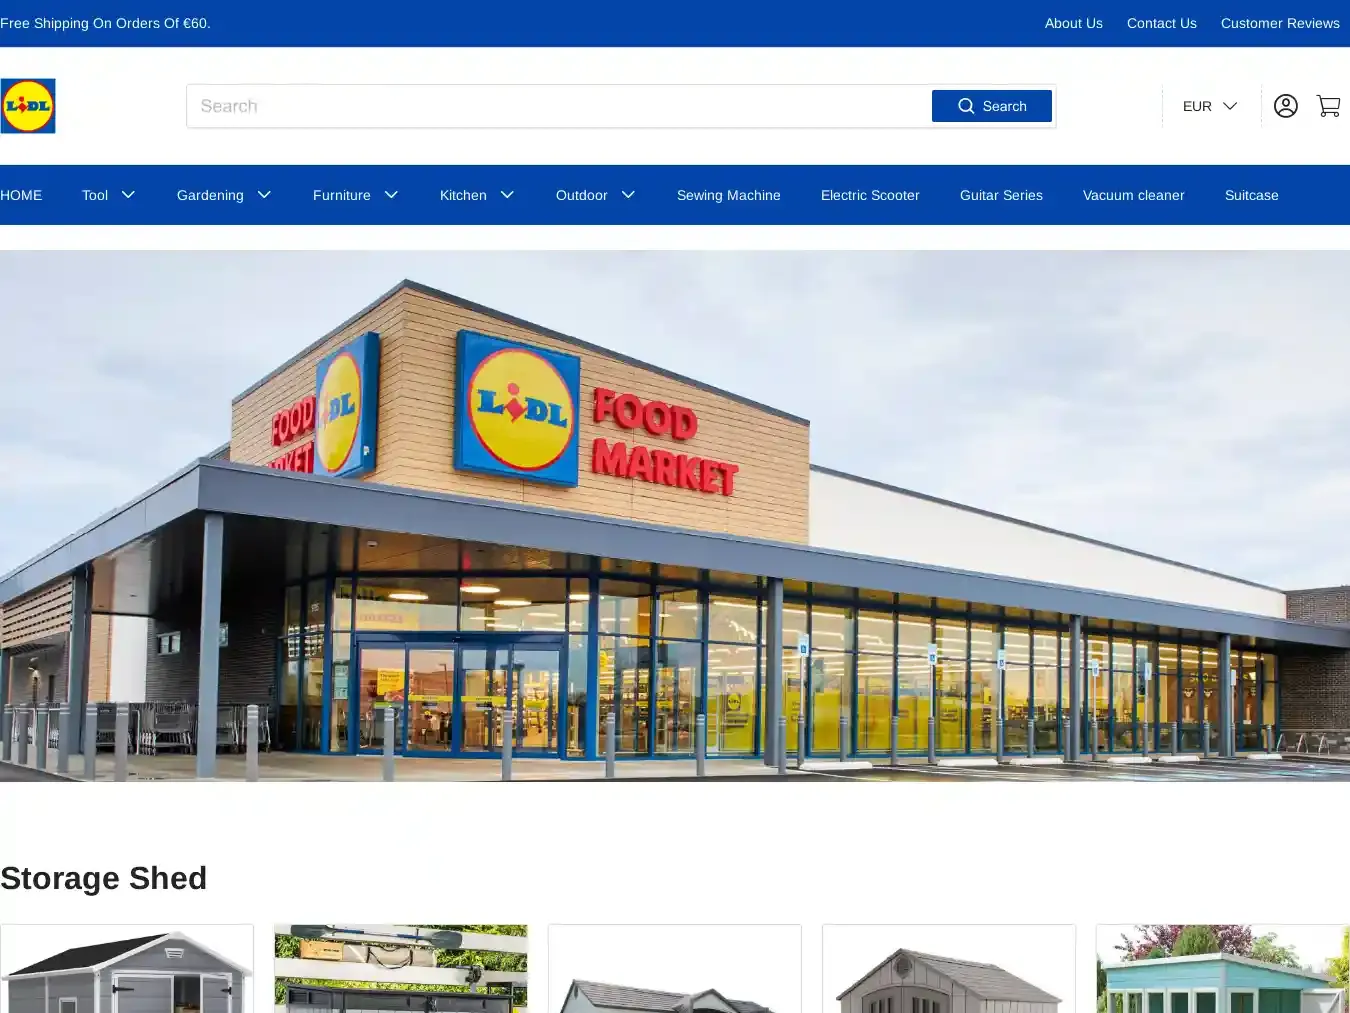 Lidl-mall.shop Fraudulent Non-Delivery website.